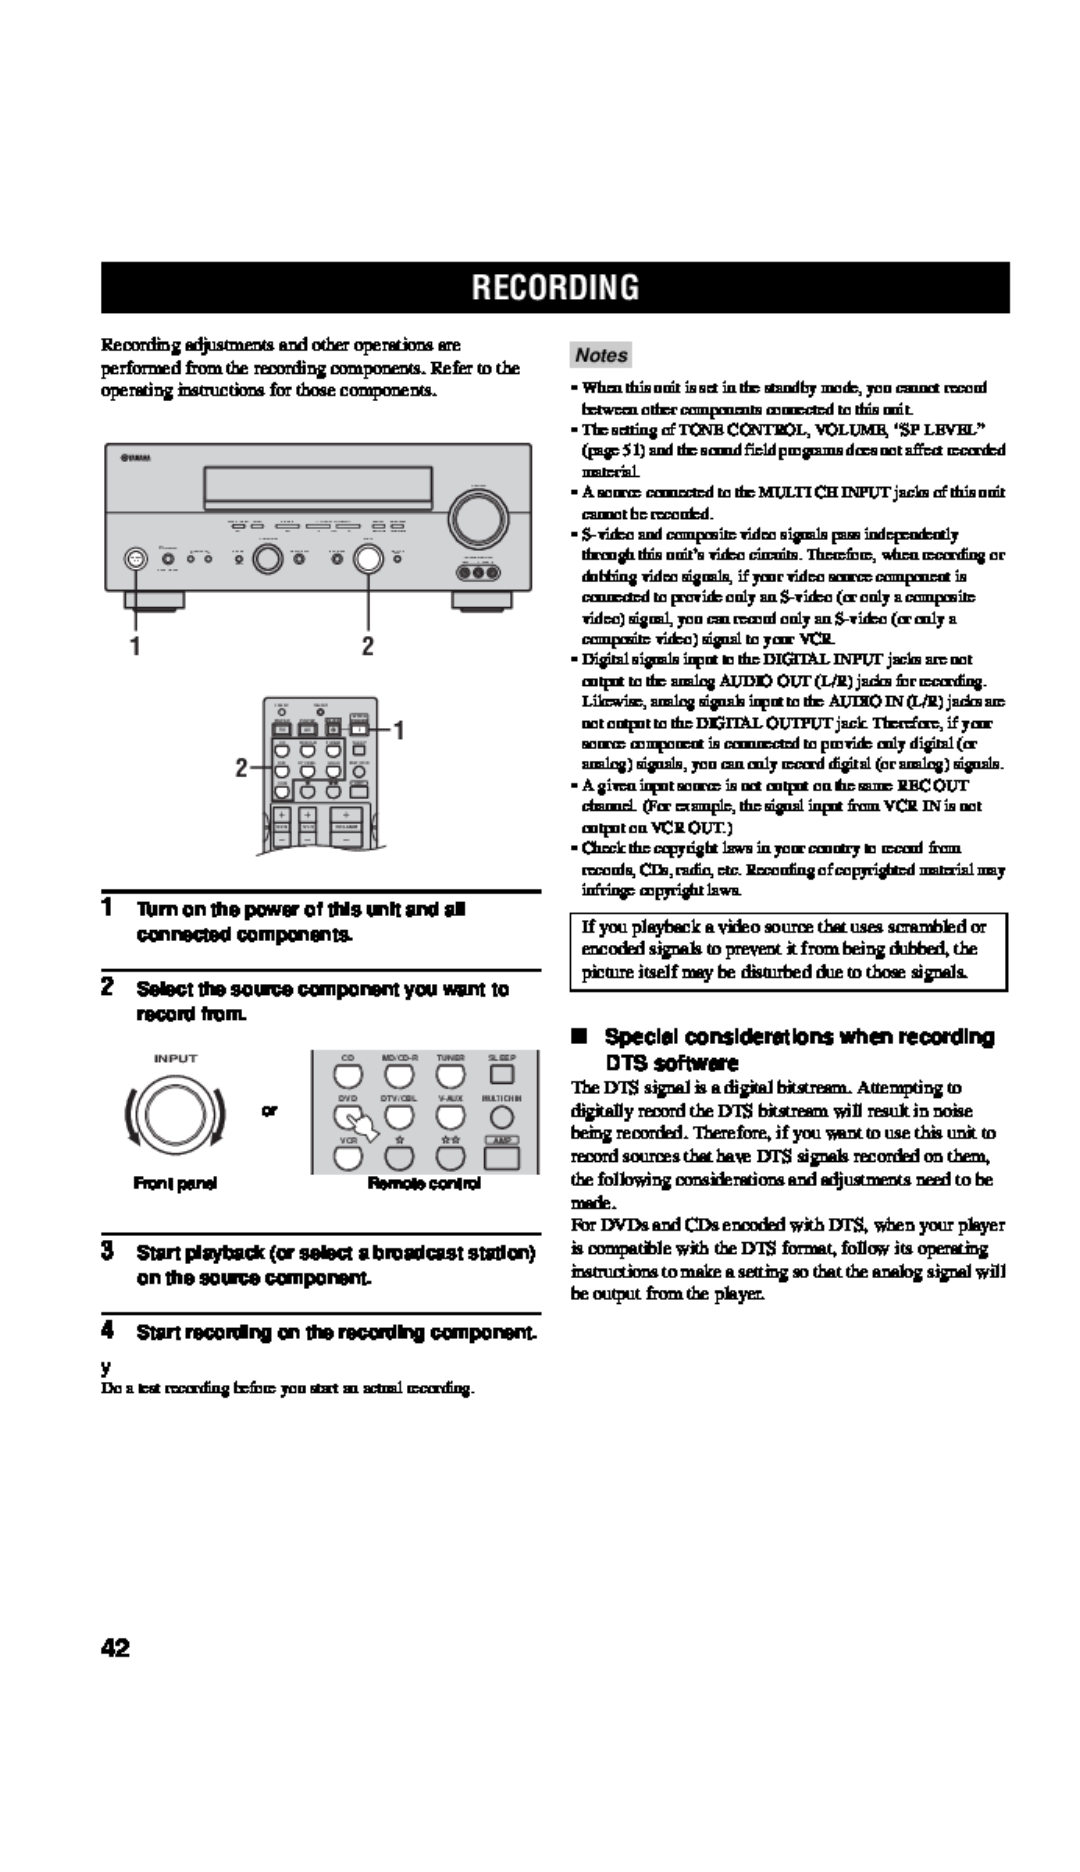 Yamaha RX-V557 Recording, 4Start recording on the recording component, Special considerations when recording, DTS software 